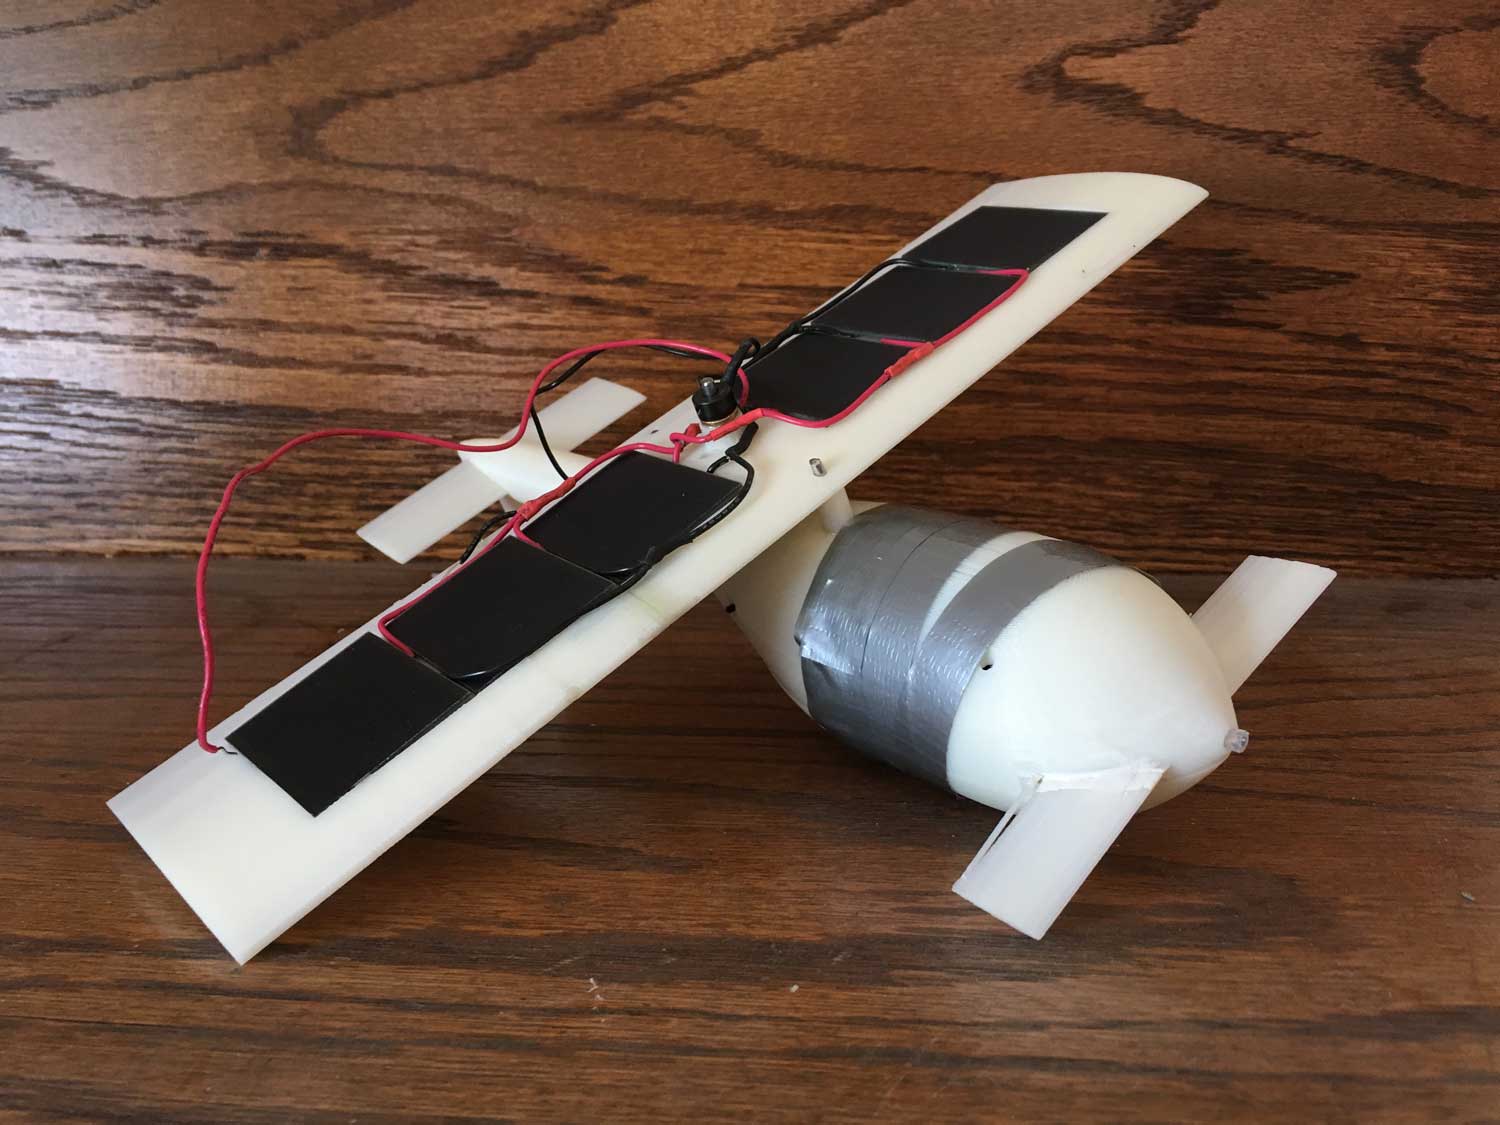 The Princeton Tiger's glider entered in the 2017 CanSat competition